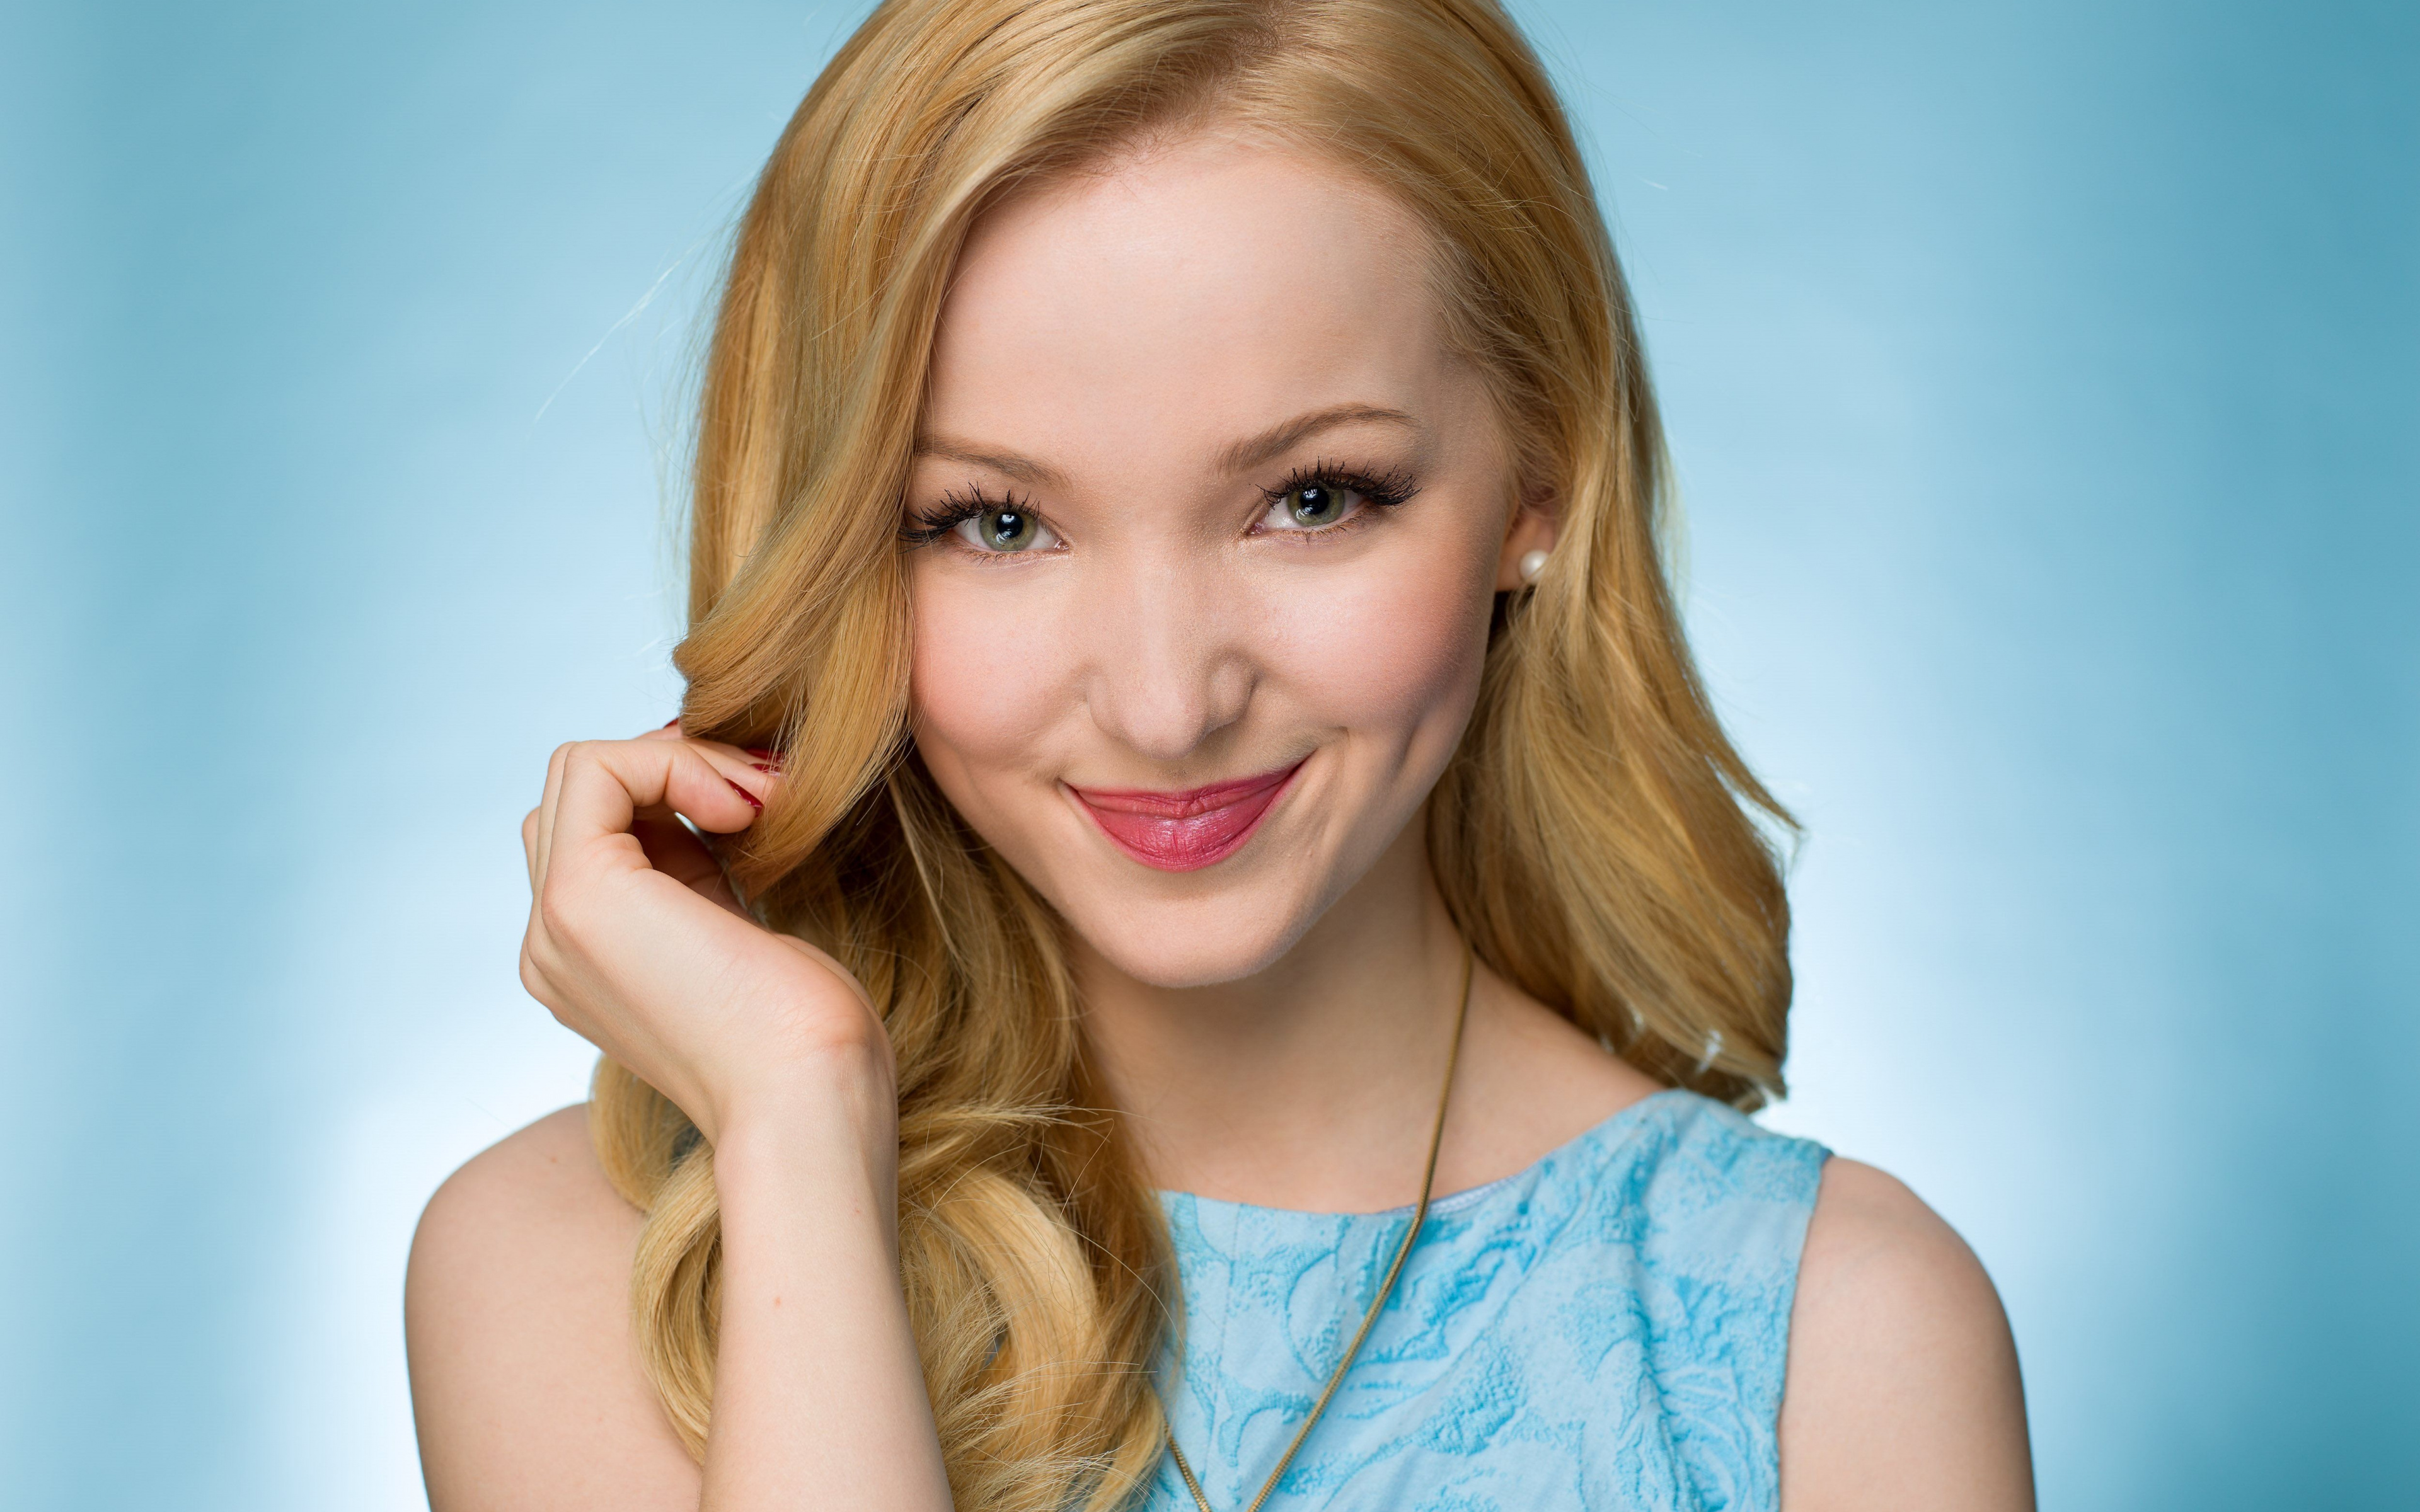 Wallpaper Smiling beautiful girl actress Dove Cameron on a blue background.